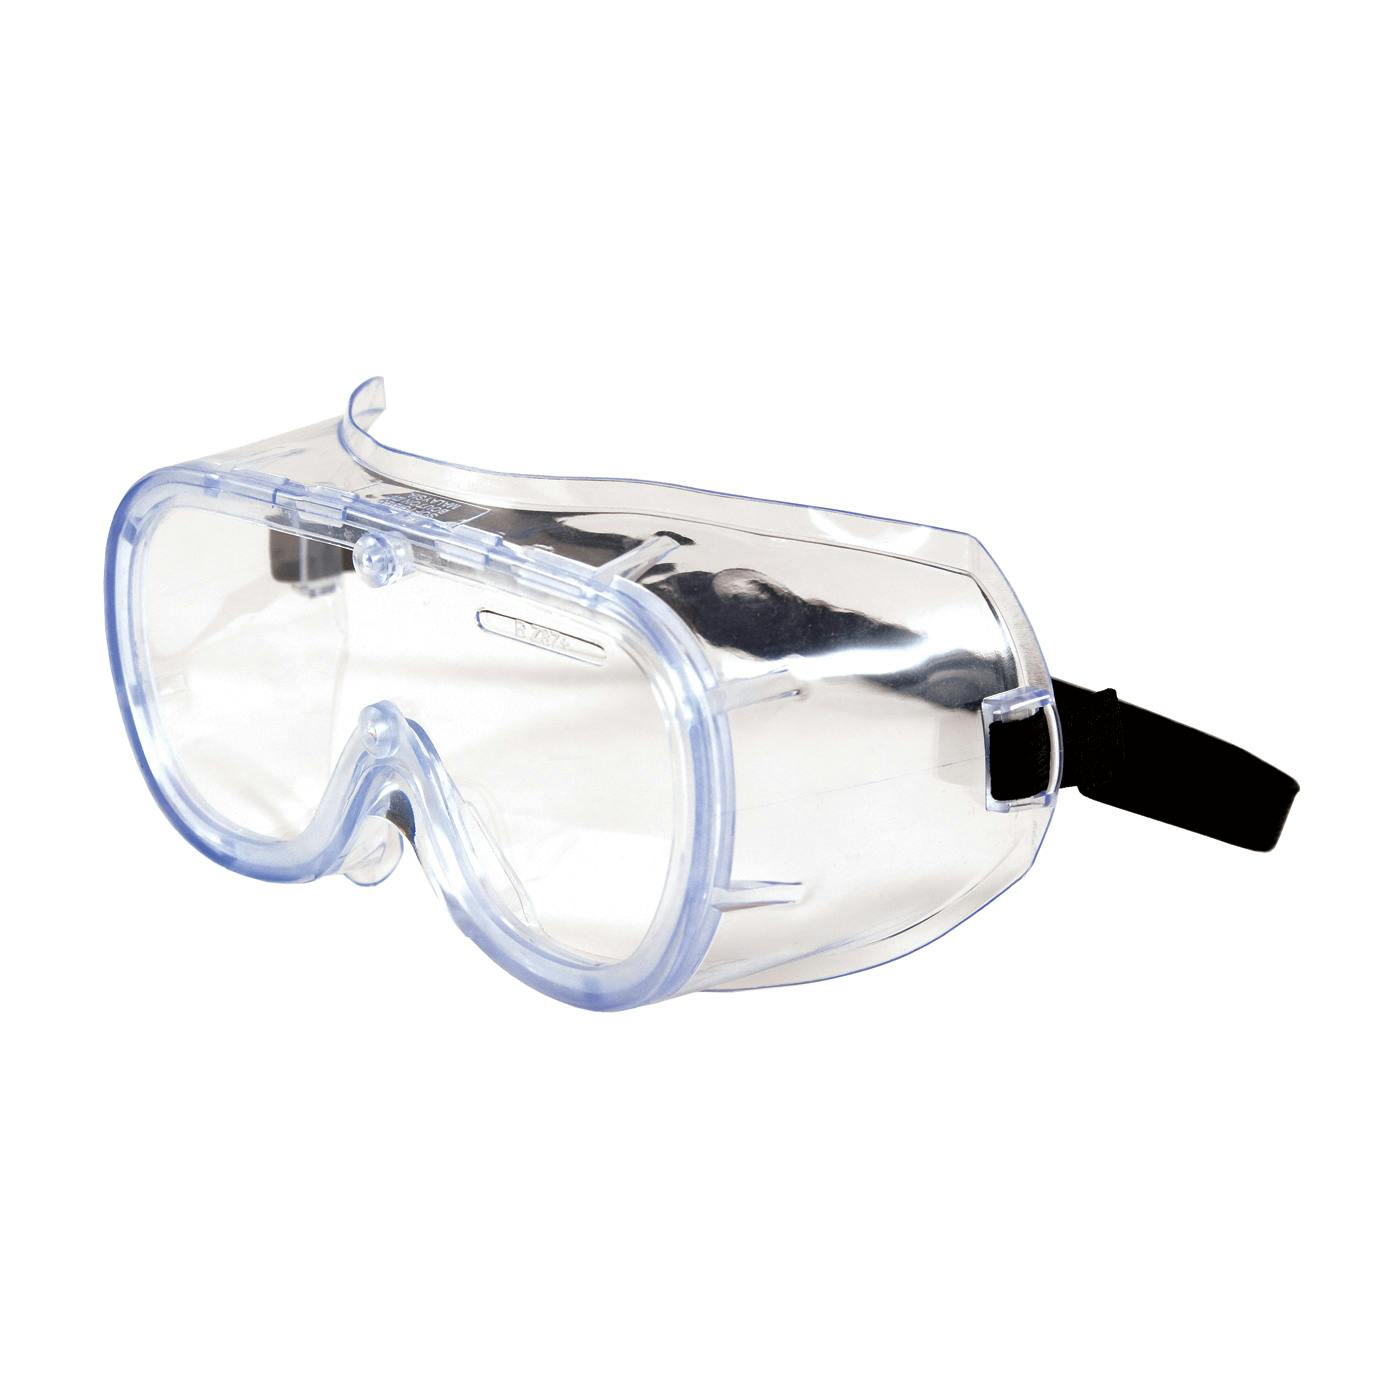 Non-Vented Goggle with Clear Blue Body, Clear Lens and Anti-Scratch / Anti-Fog Coating, Clear (248-5290-400B) - OS